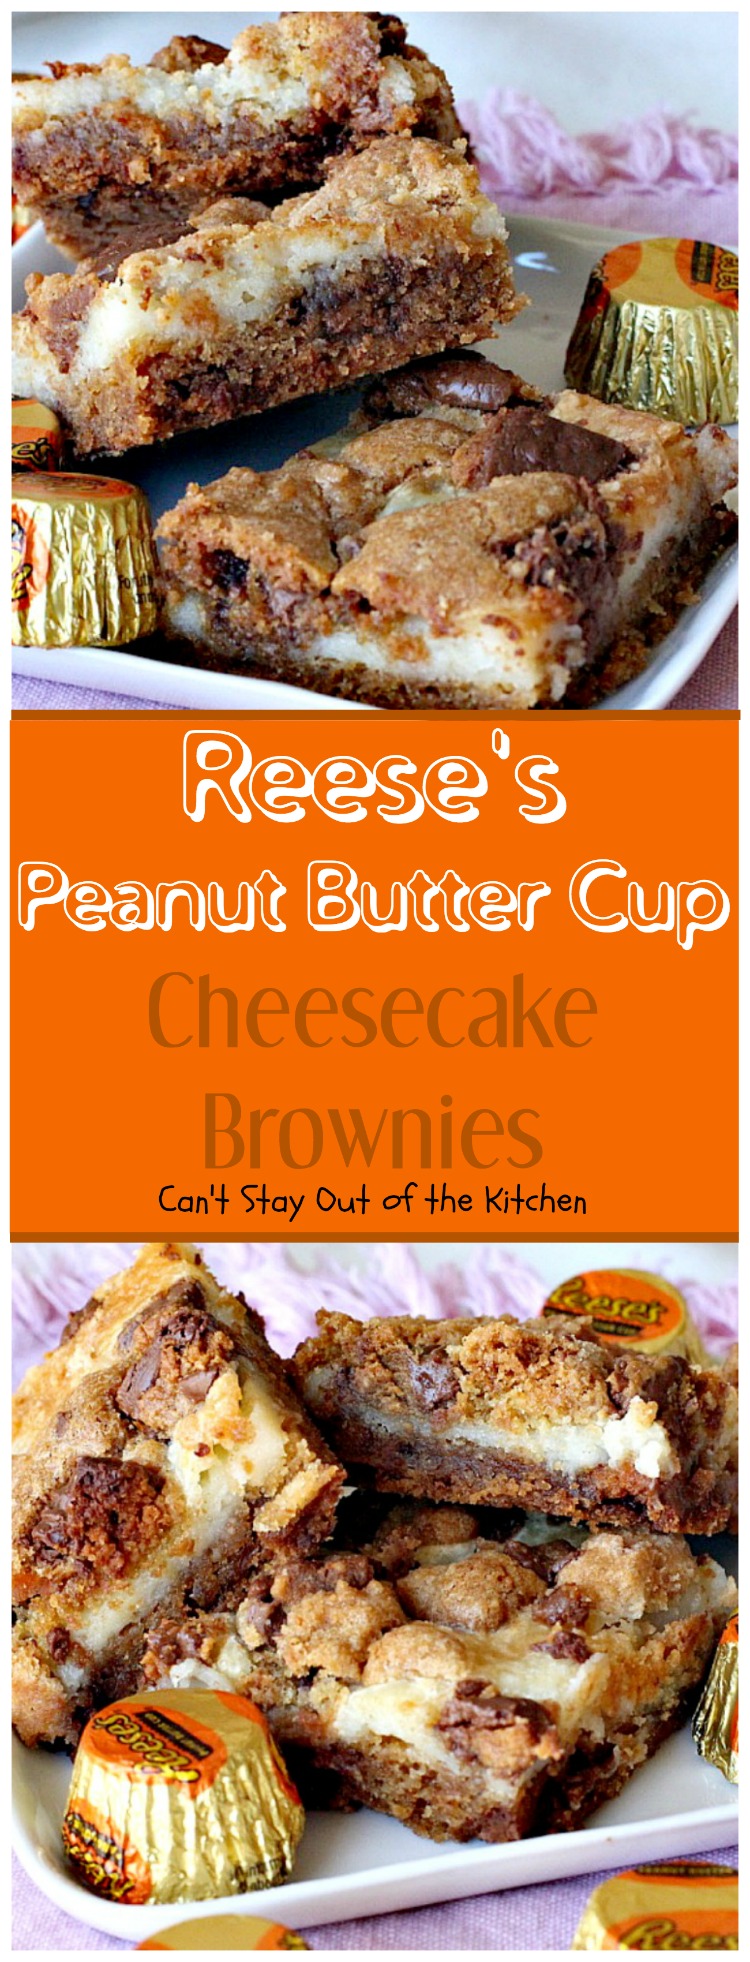 Reese's Peanut Butter Cup Cheesecake Brownies | Can't Stay Out of the Kitchen